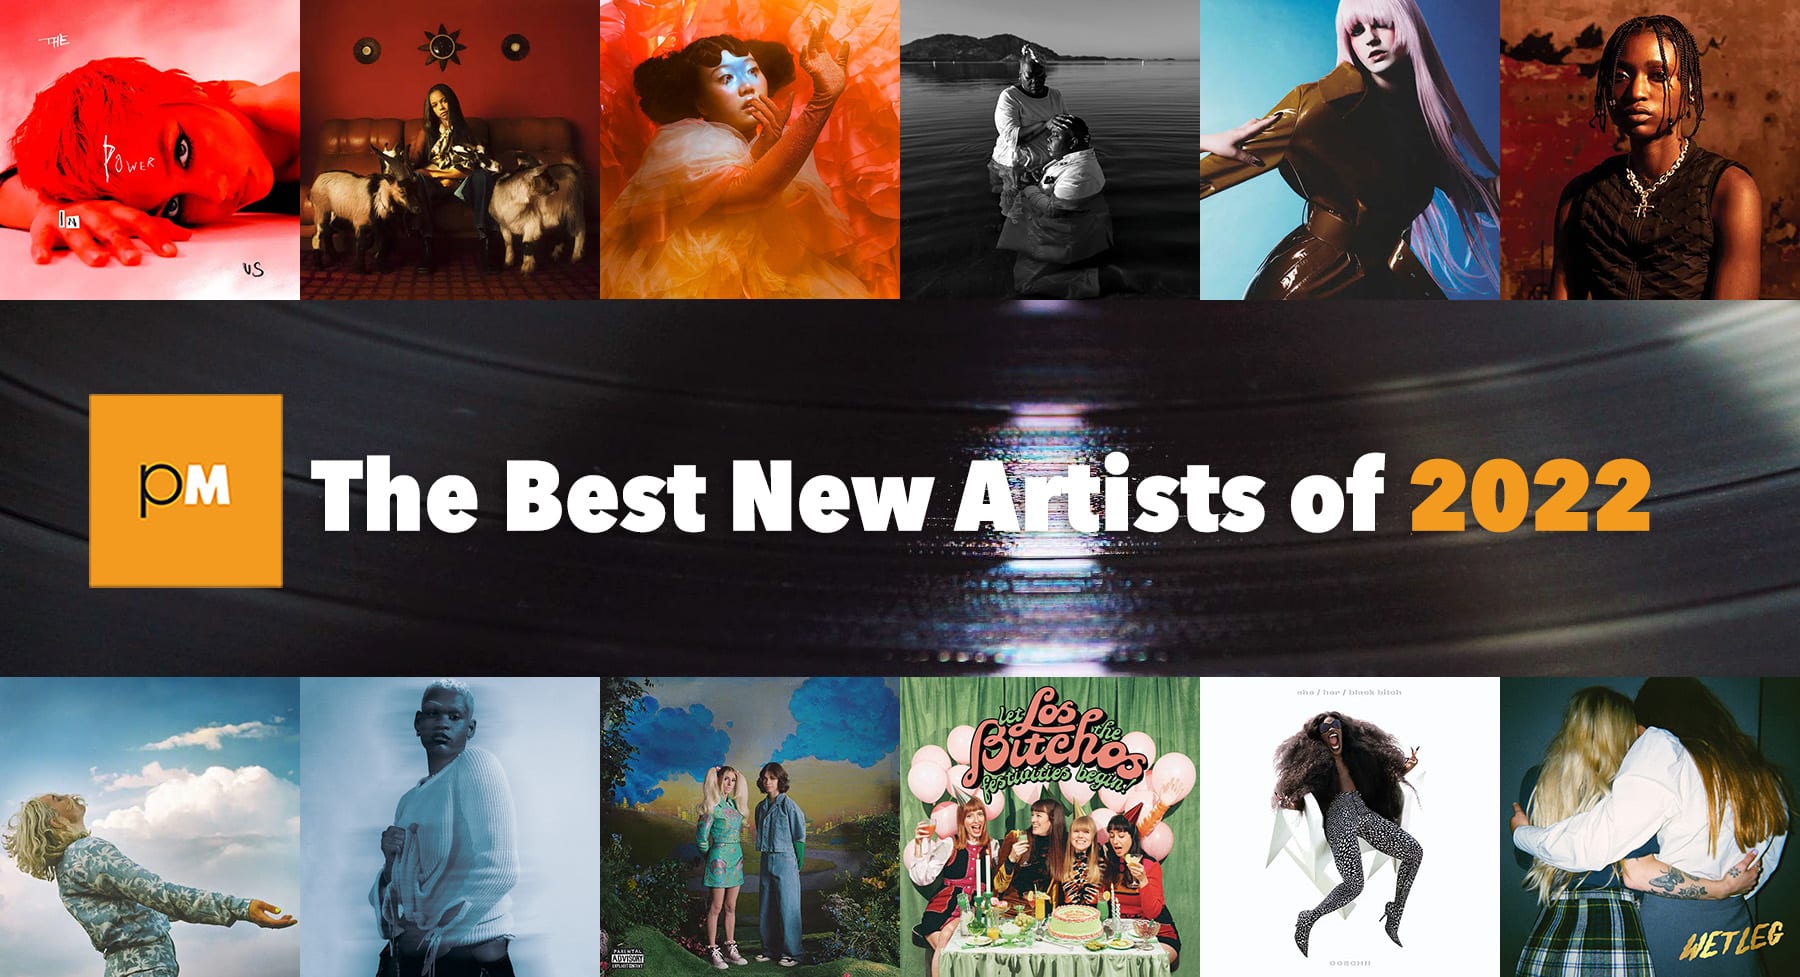 The Best New Artists of 2022